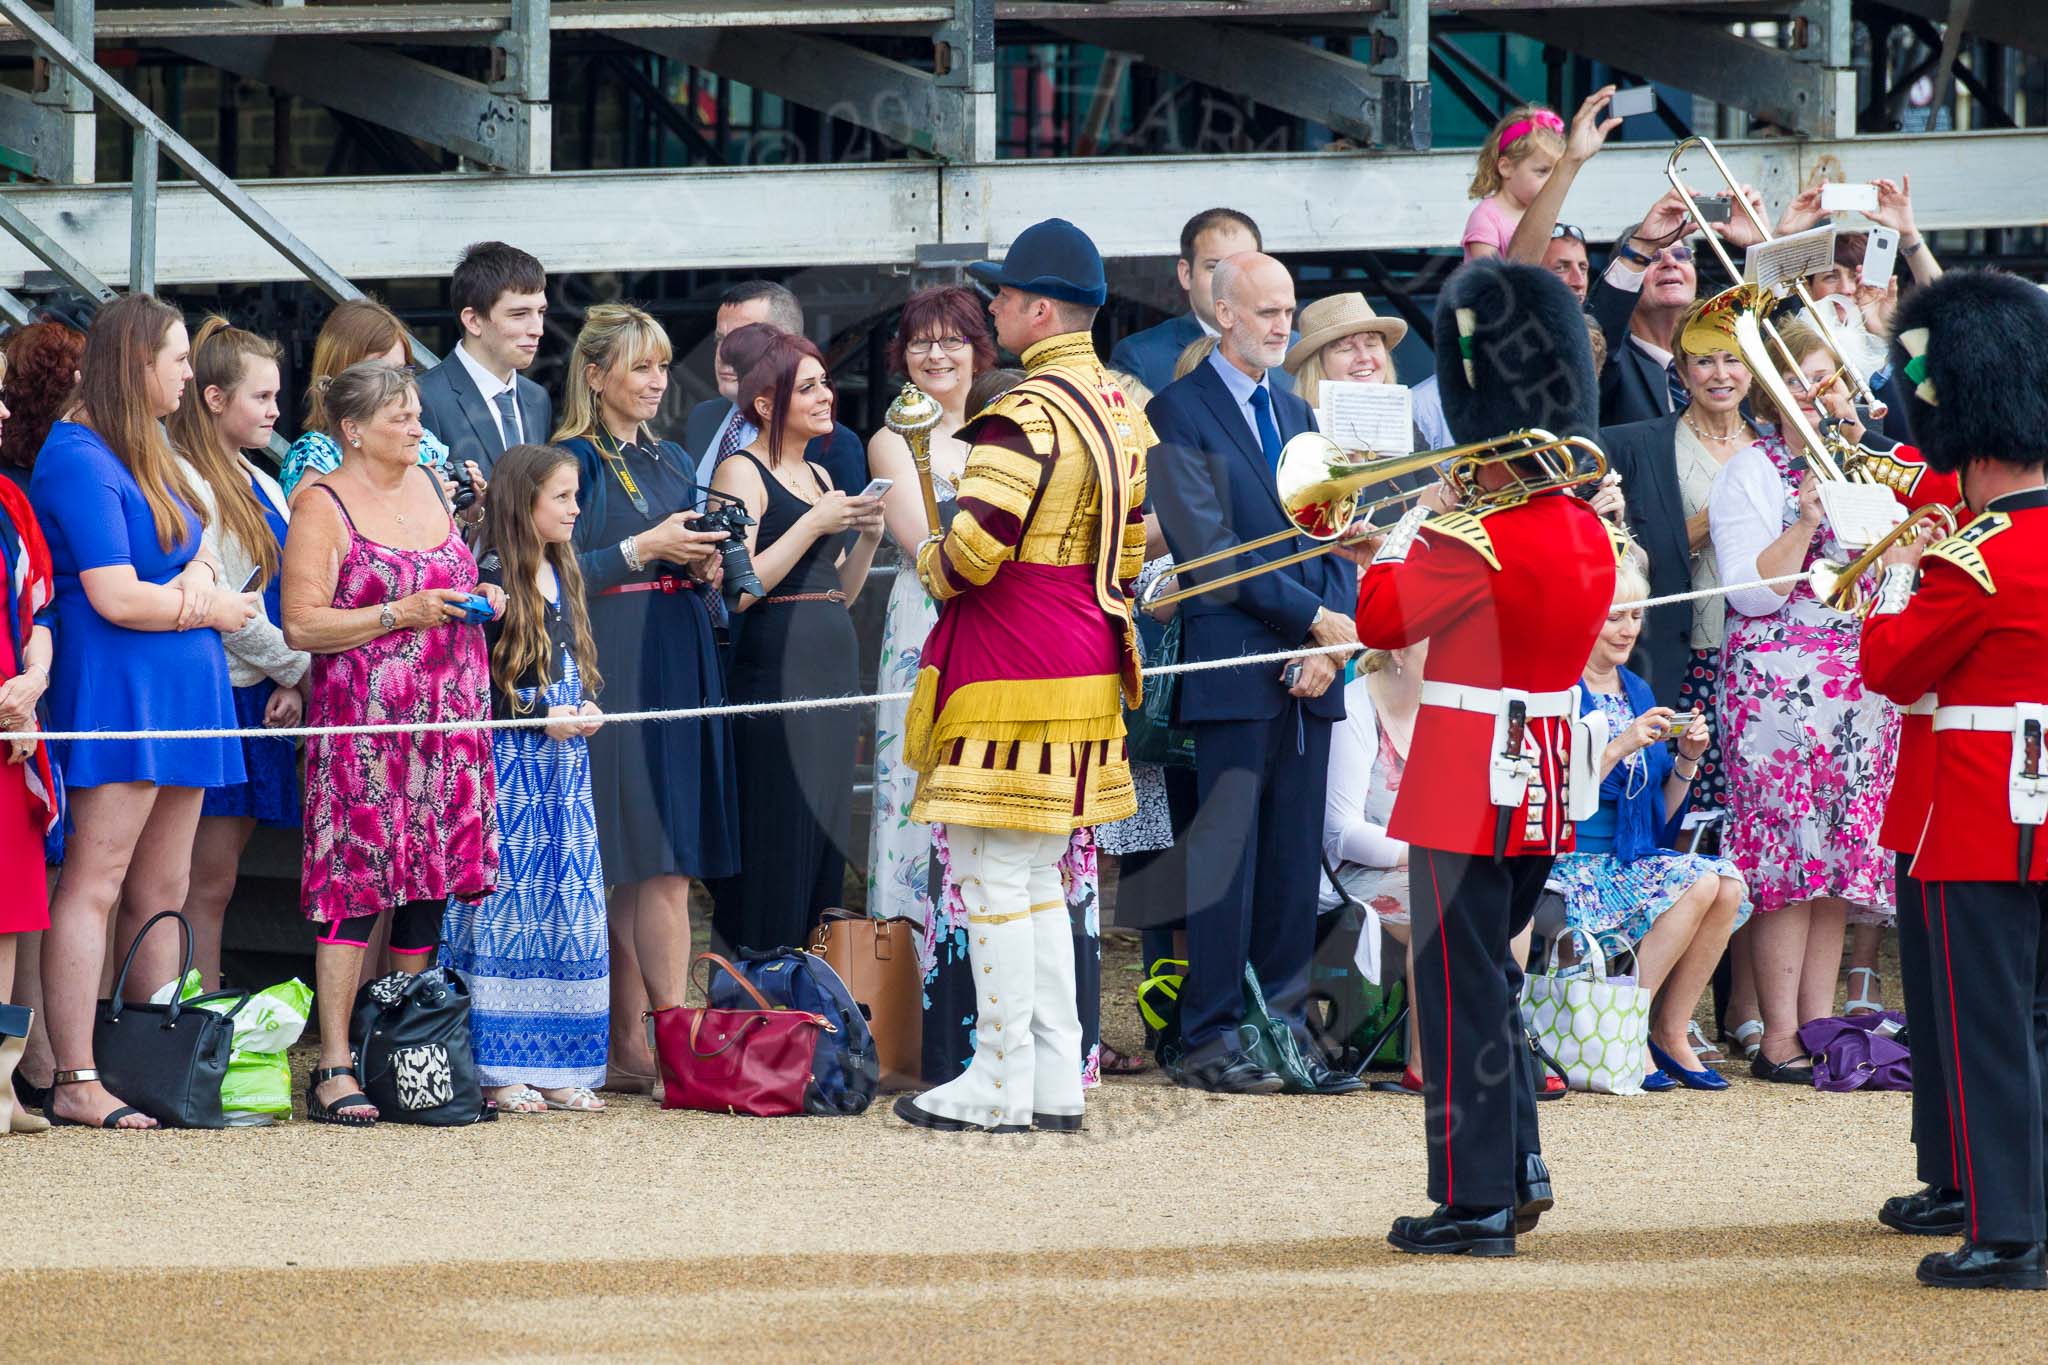 Trooping the Colour 2014.
Horse Guards Parade, Westminster,
London SW1A,

United Kingdom,
on 14 June 2014 at 10:13, image #82